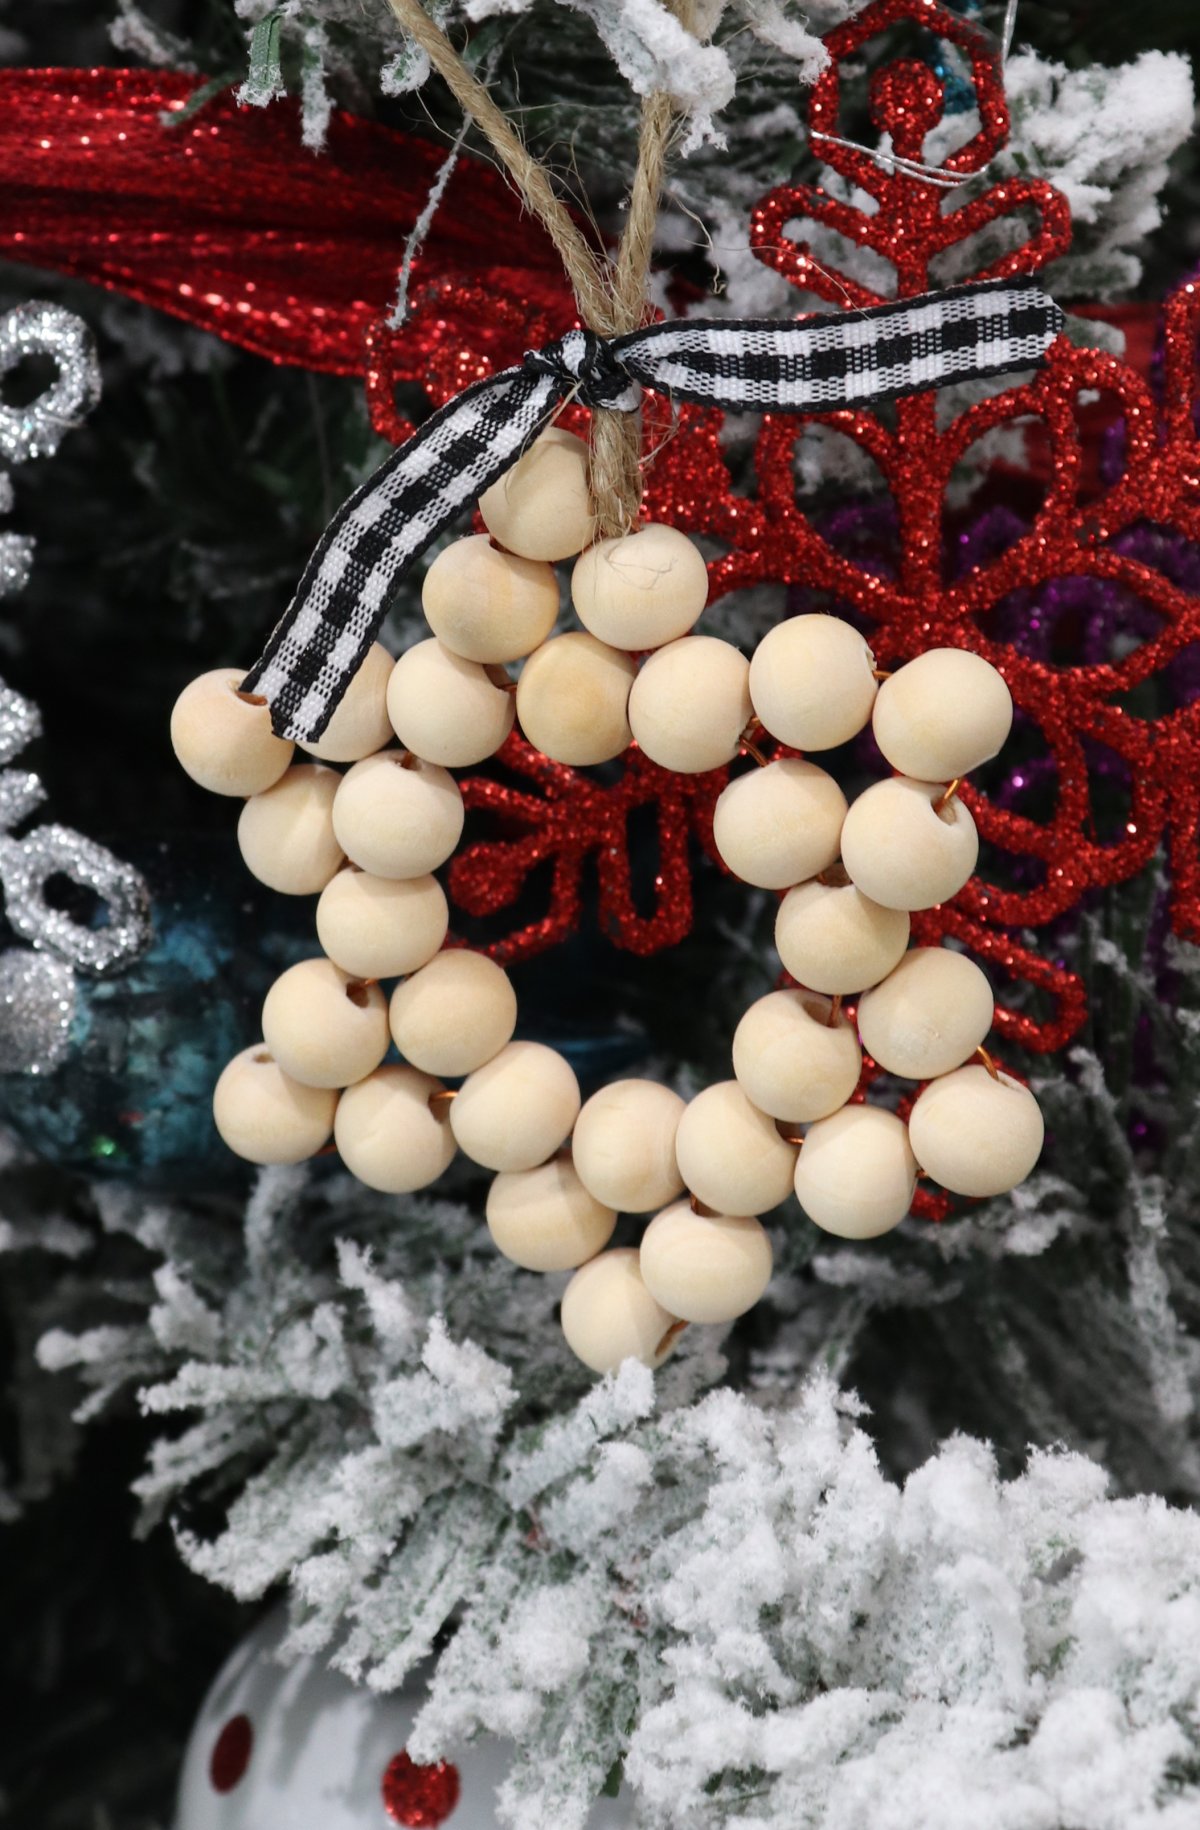 Image contains a wooden bead ornament in the shape of a six pointed star hanging on a tree.